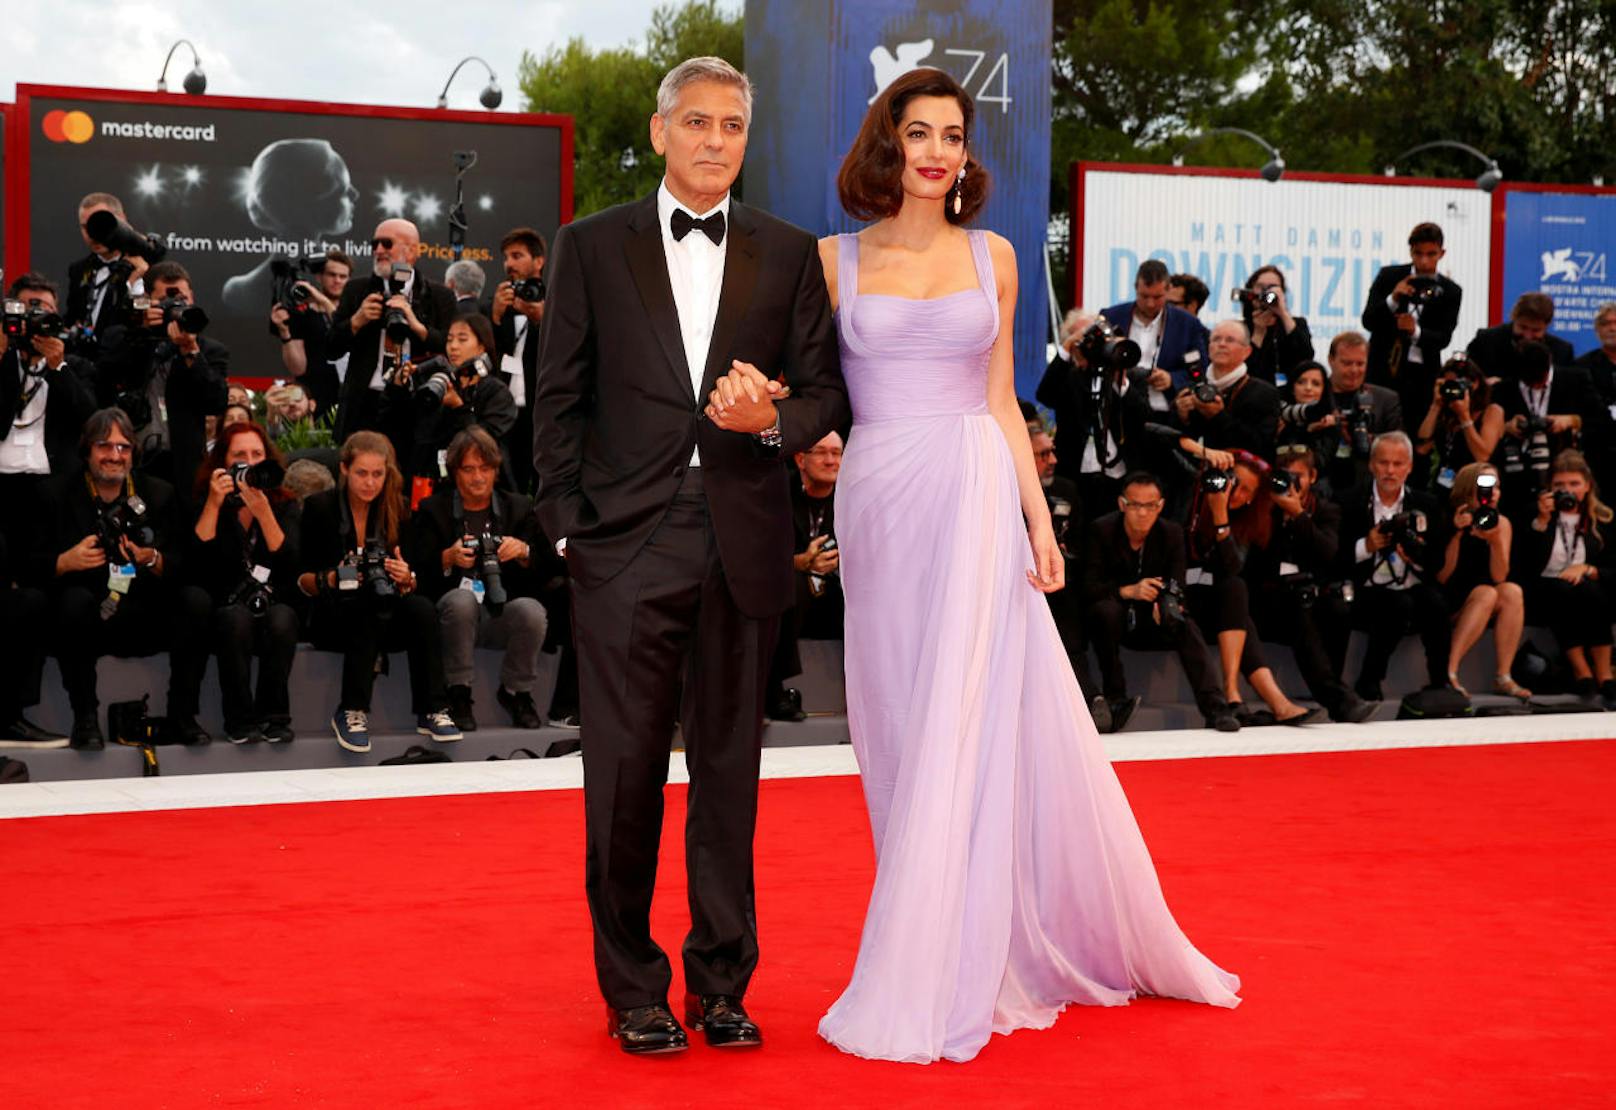 Actor and director George Clooney and his wife Amal pose during a red carpet event for the movie "Suburbicon" at the 74th Venice Film Festival in Venice, Italy September 2, 2017. REUTERS/Alessandro Bianchi - RC1C5E79B7A0